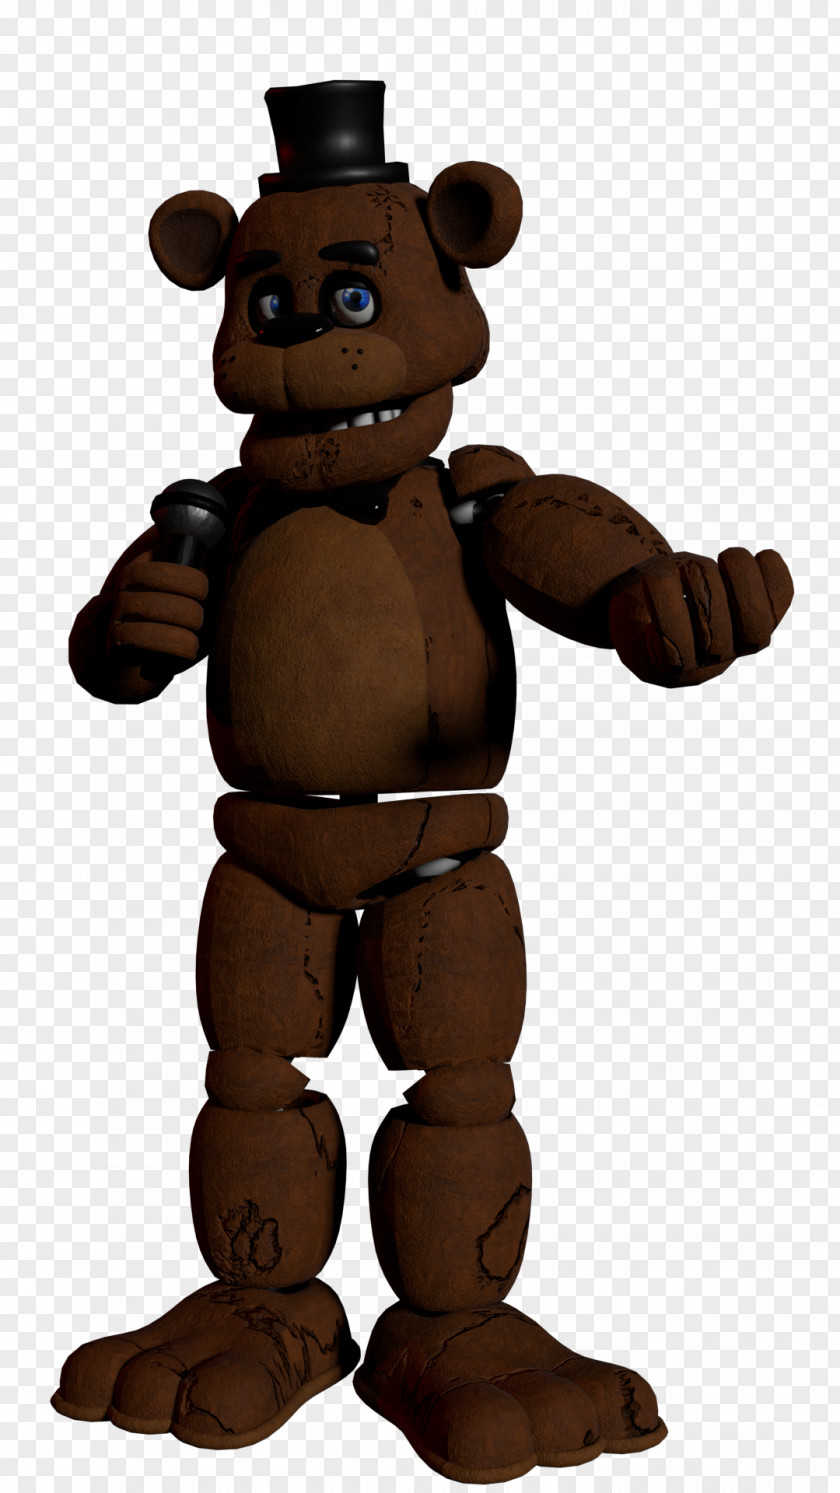 Relaxation Five Nights At Freddy's: Sister Location Rendering Texture Mapping Animation PNG